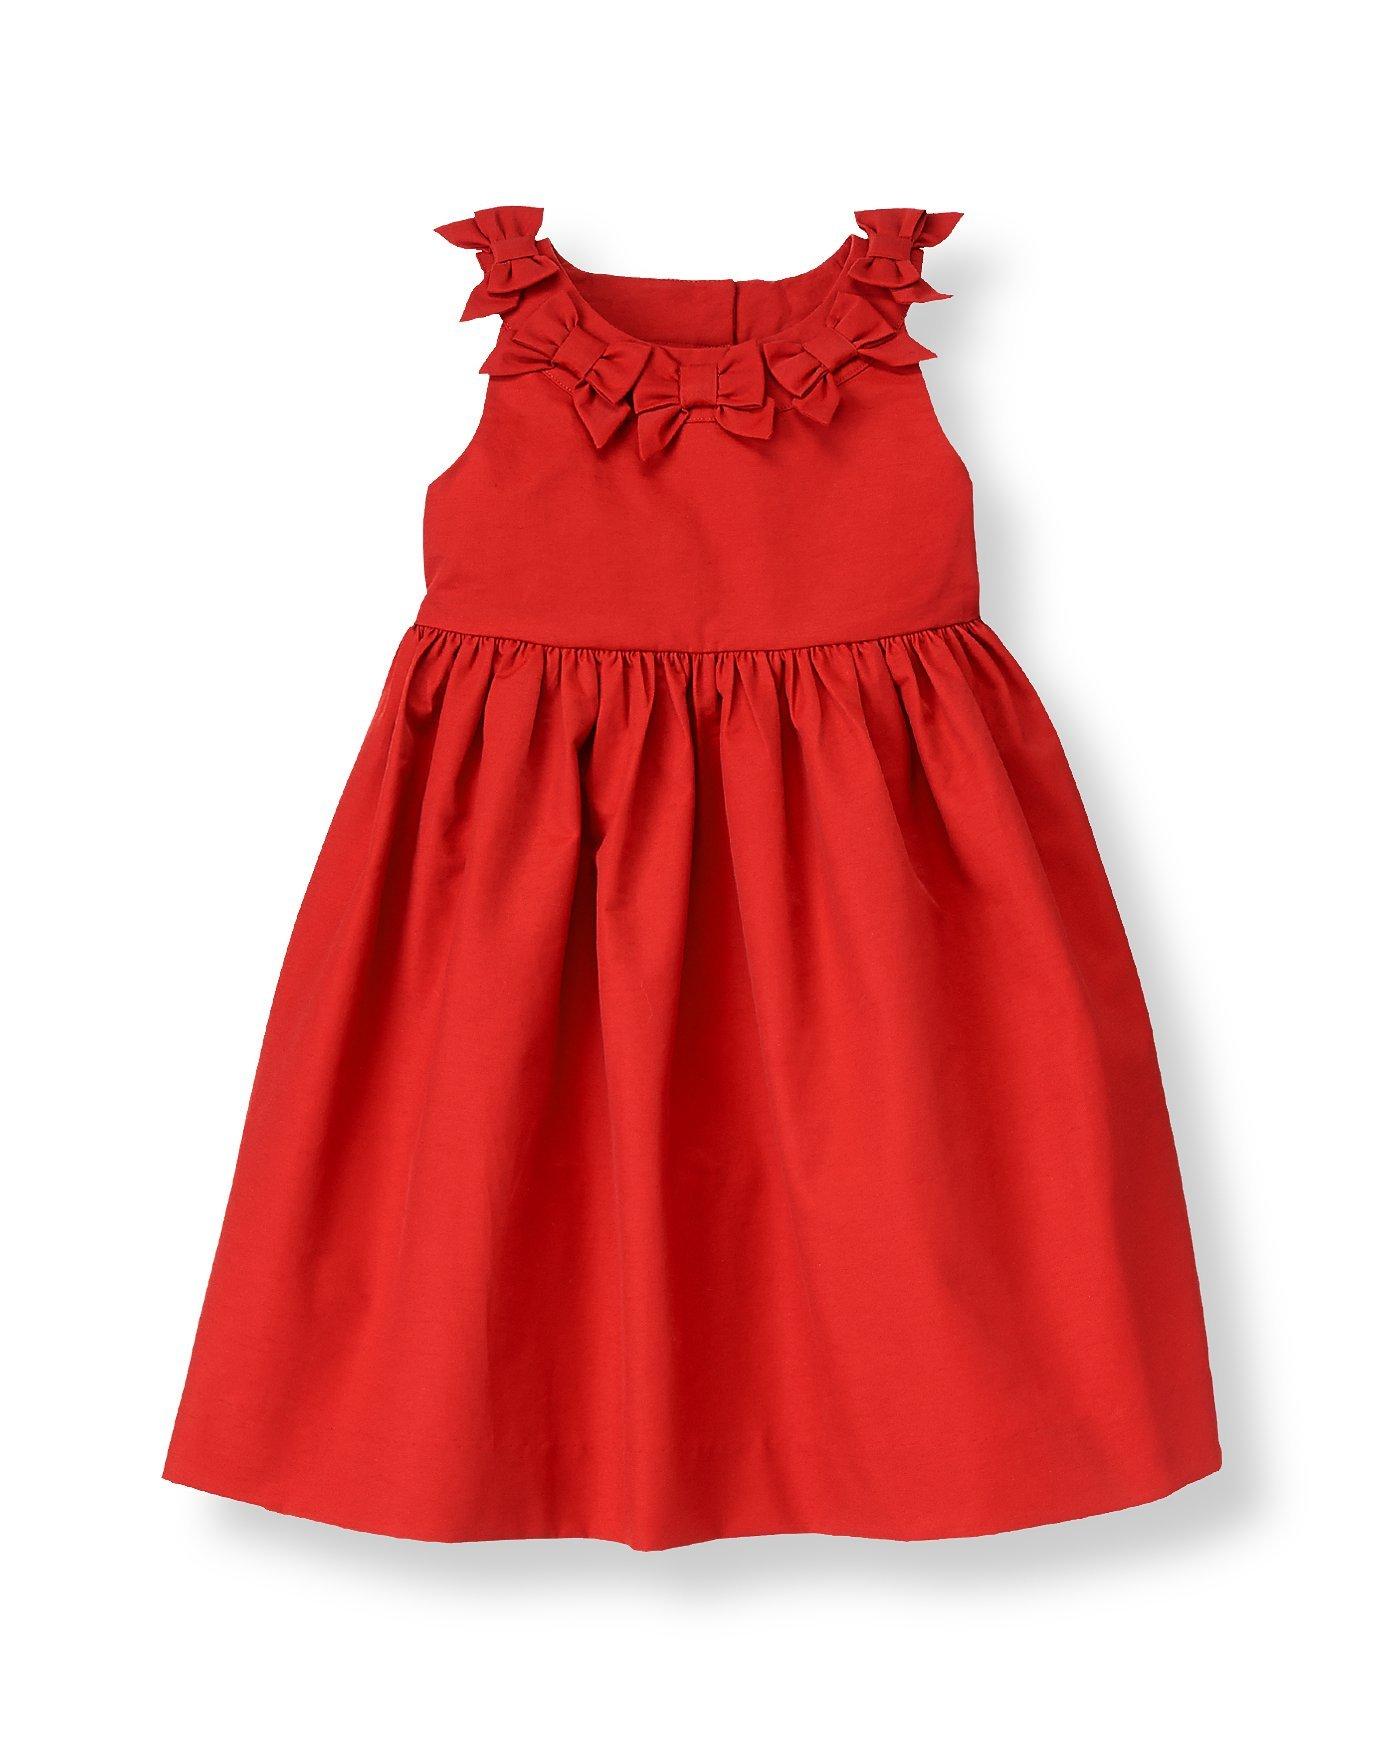 Girl Penguin Red Bow Twill Dress by Janie and Jack